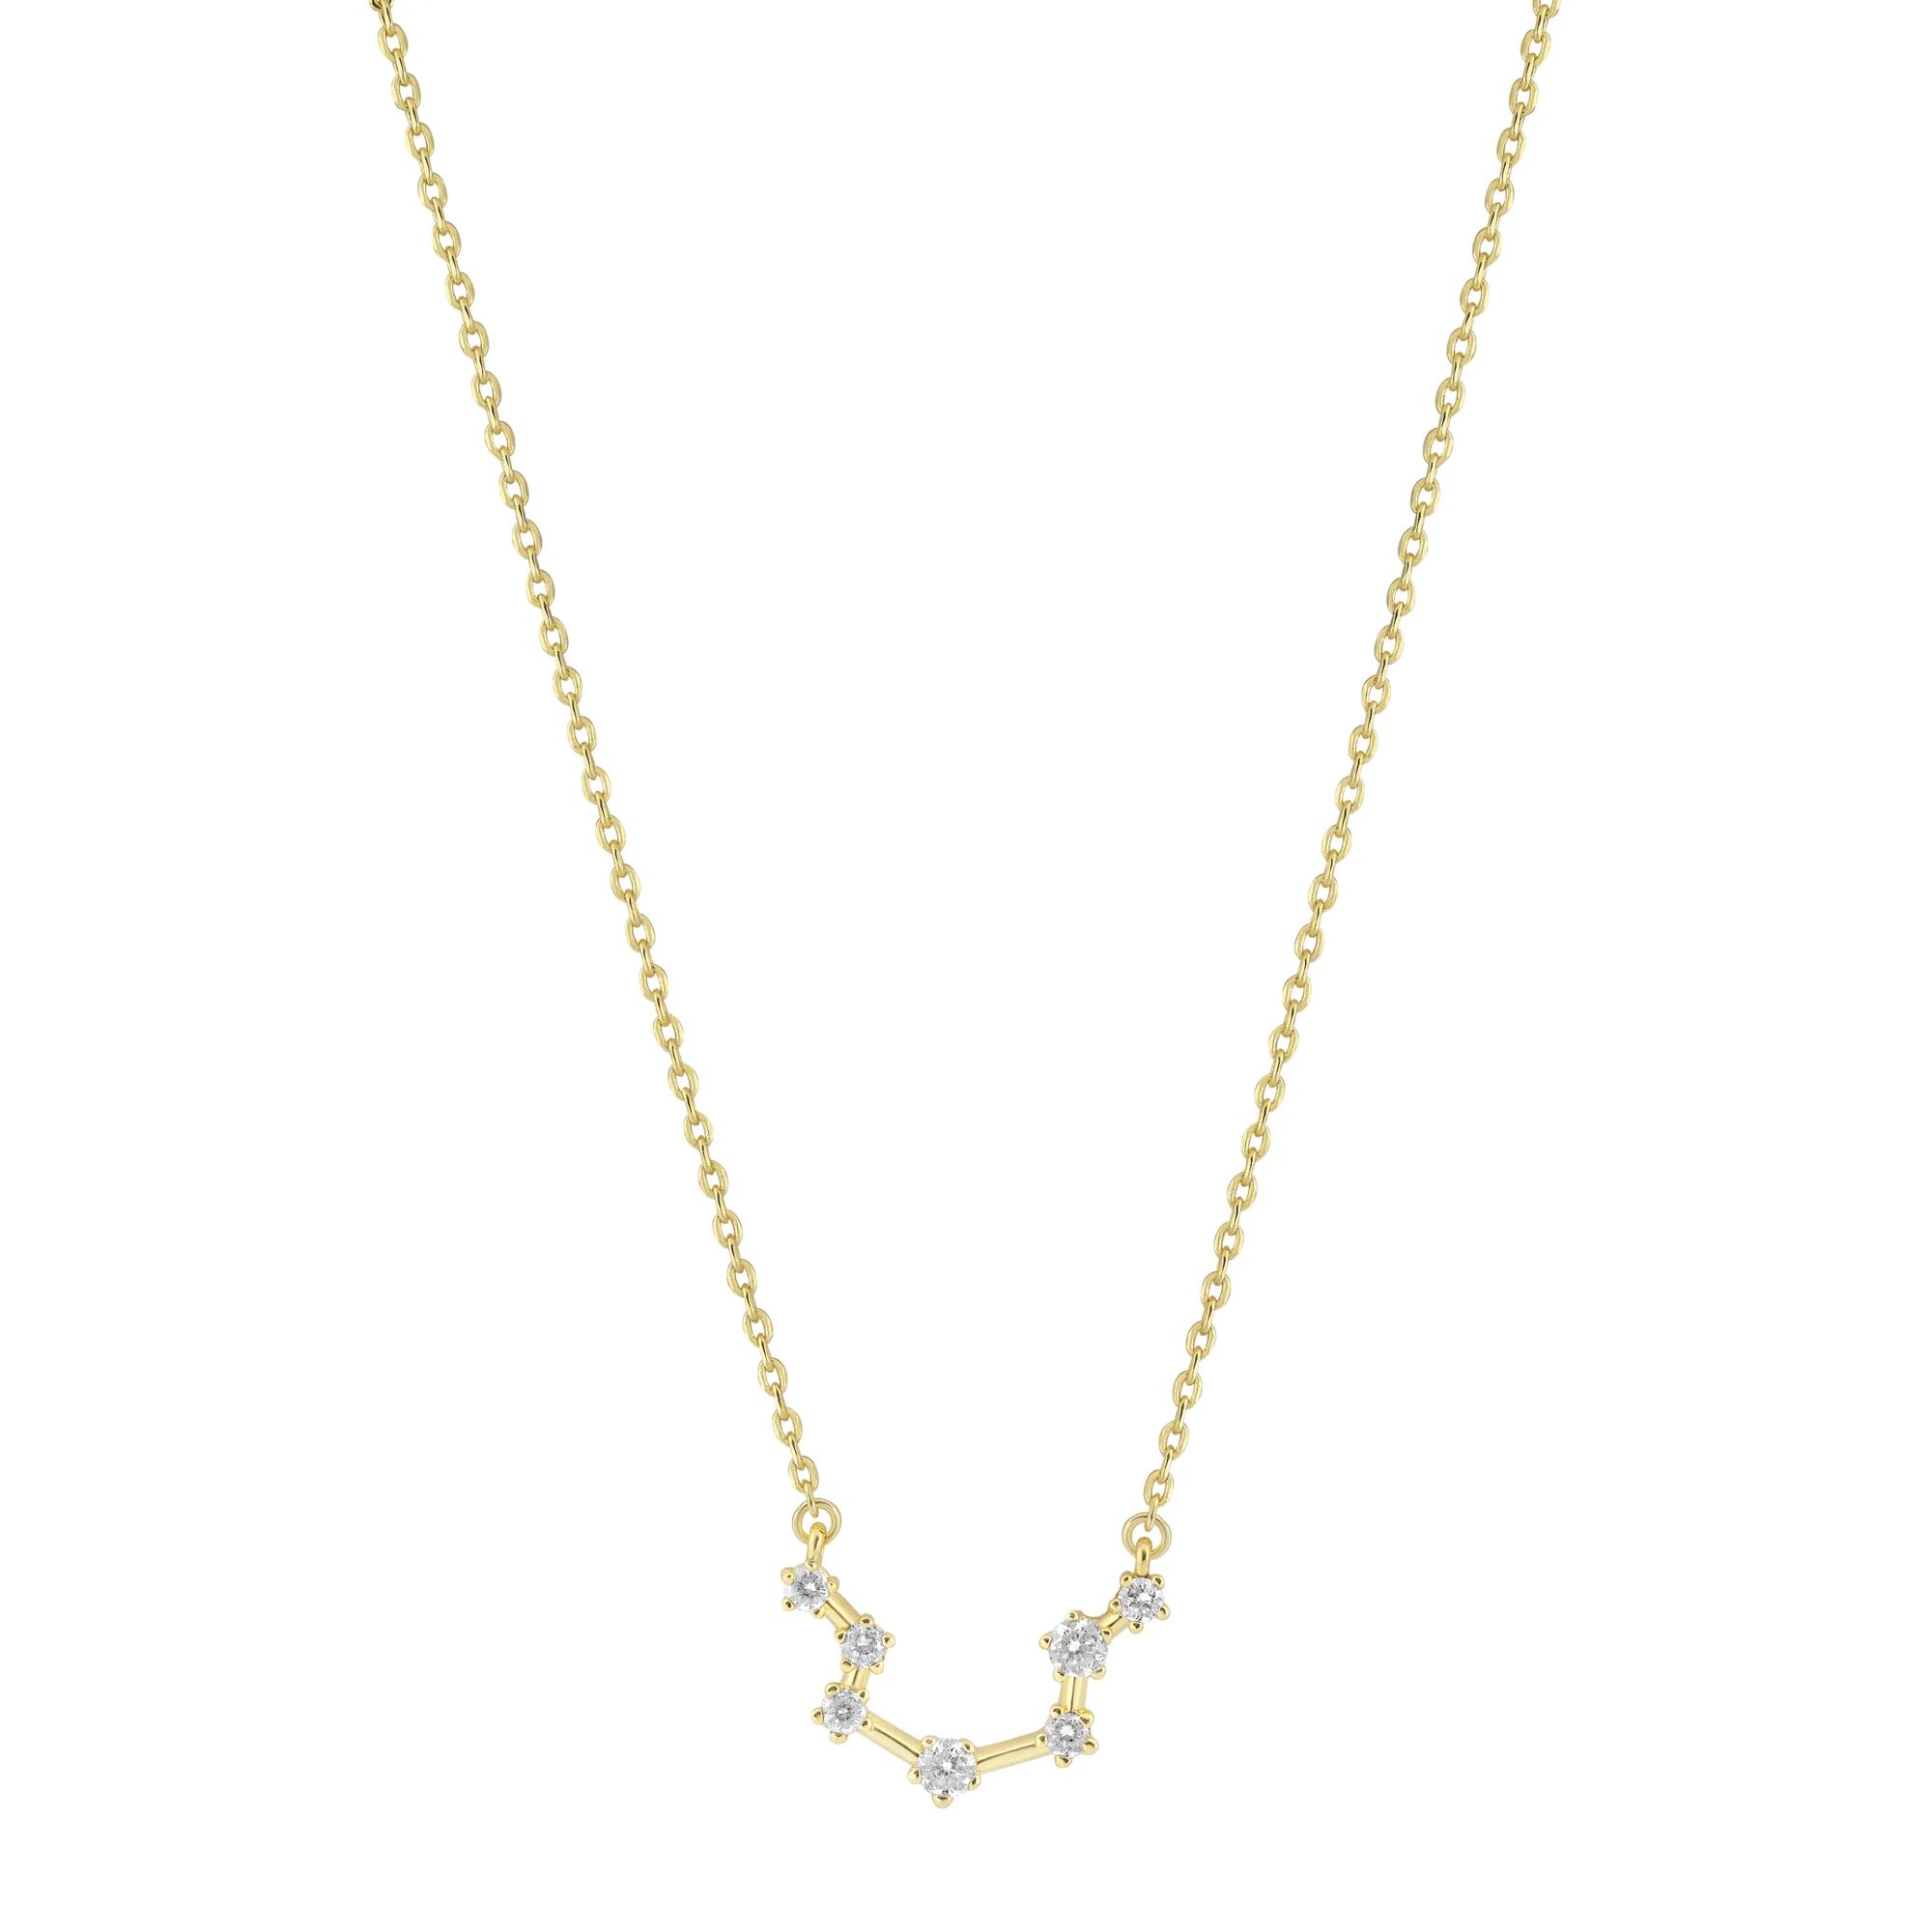 Constellation Necklace | Electric Picks Jewelry